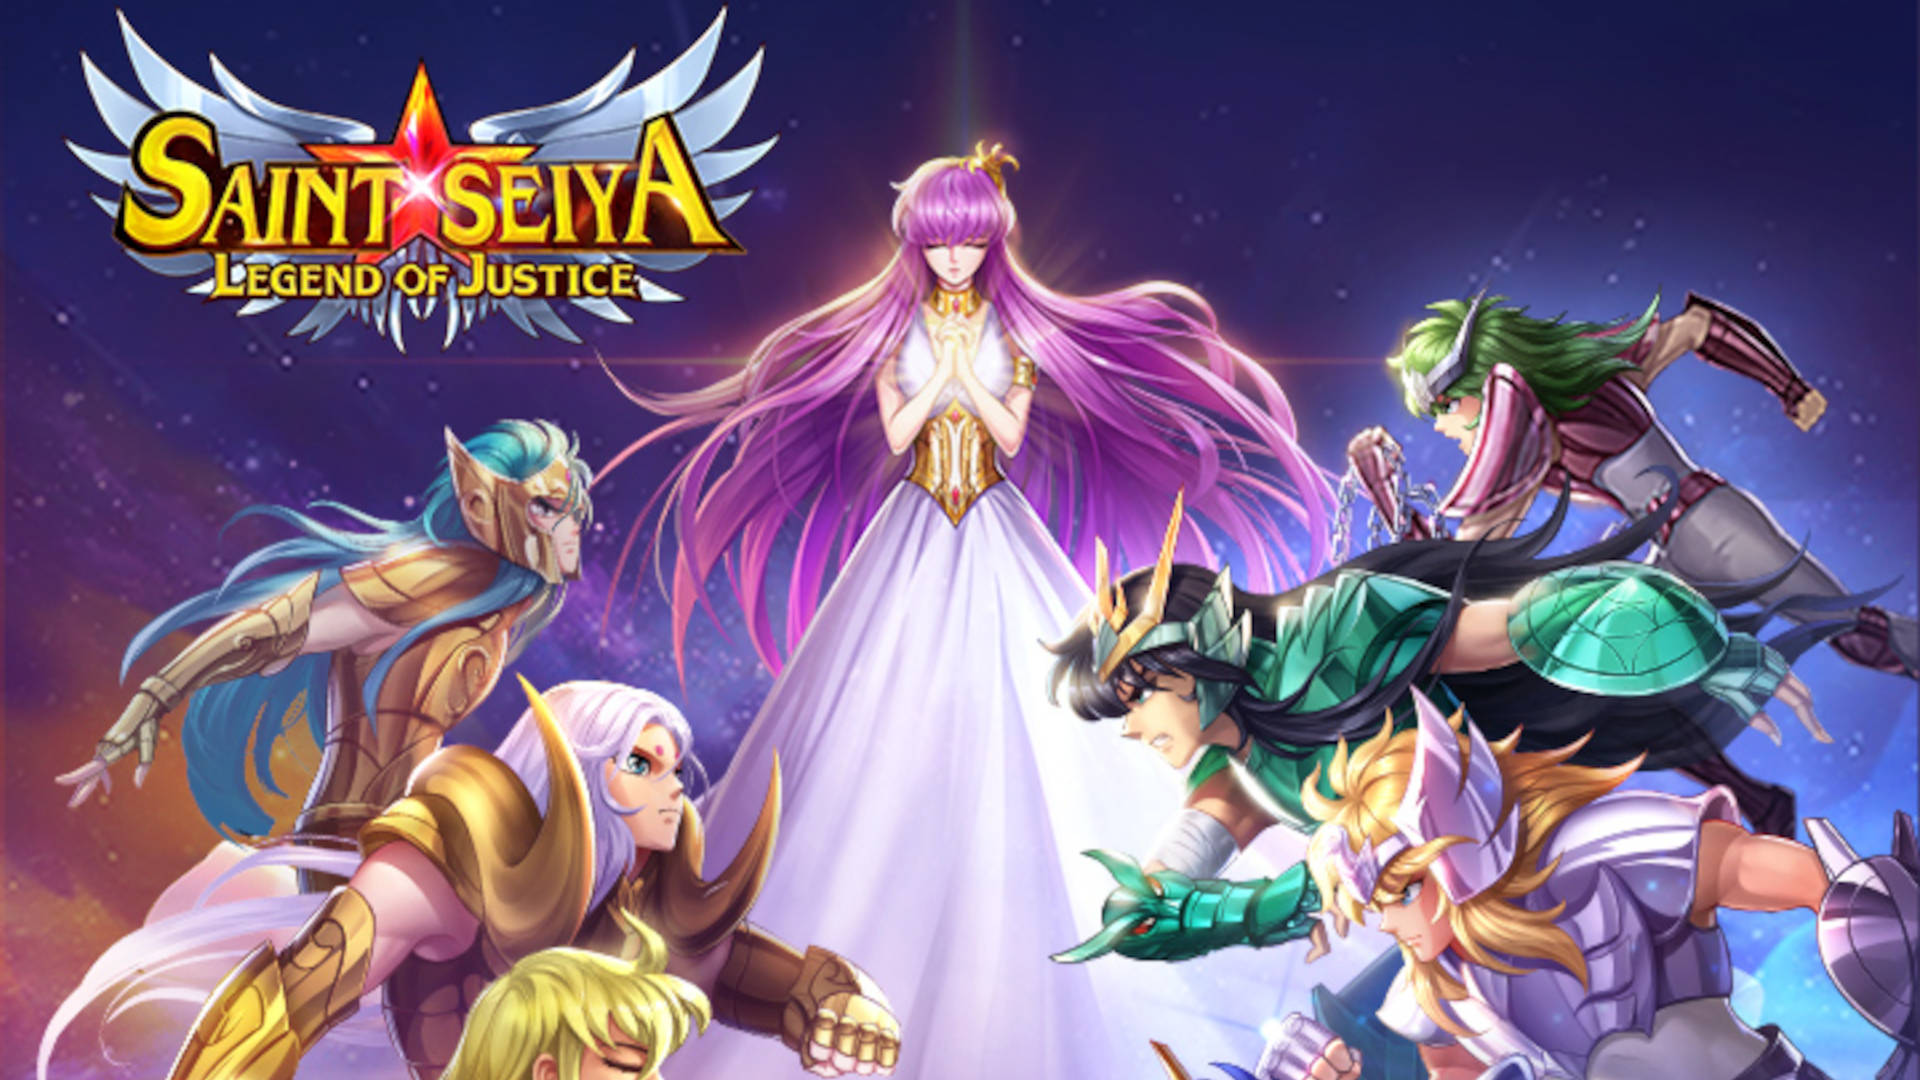 Saint Seiya: Legend of Justice Reroll – How it Works